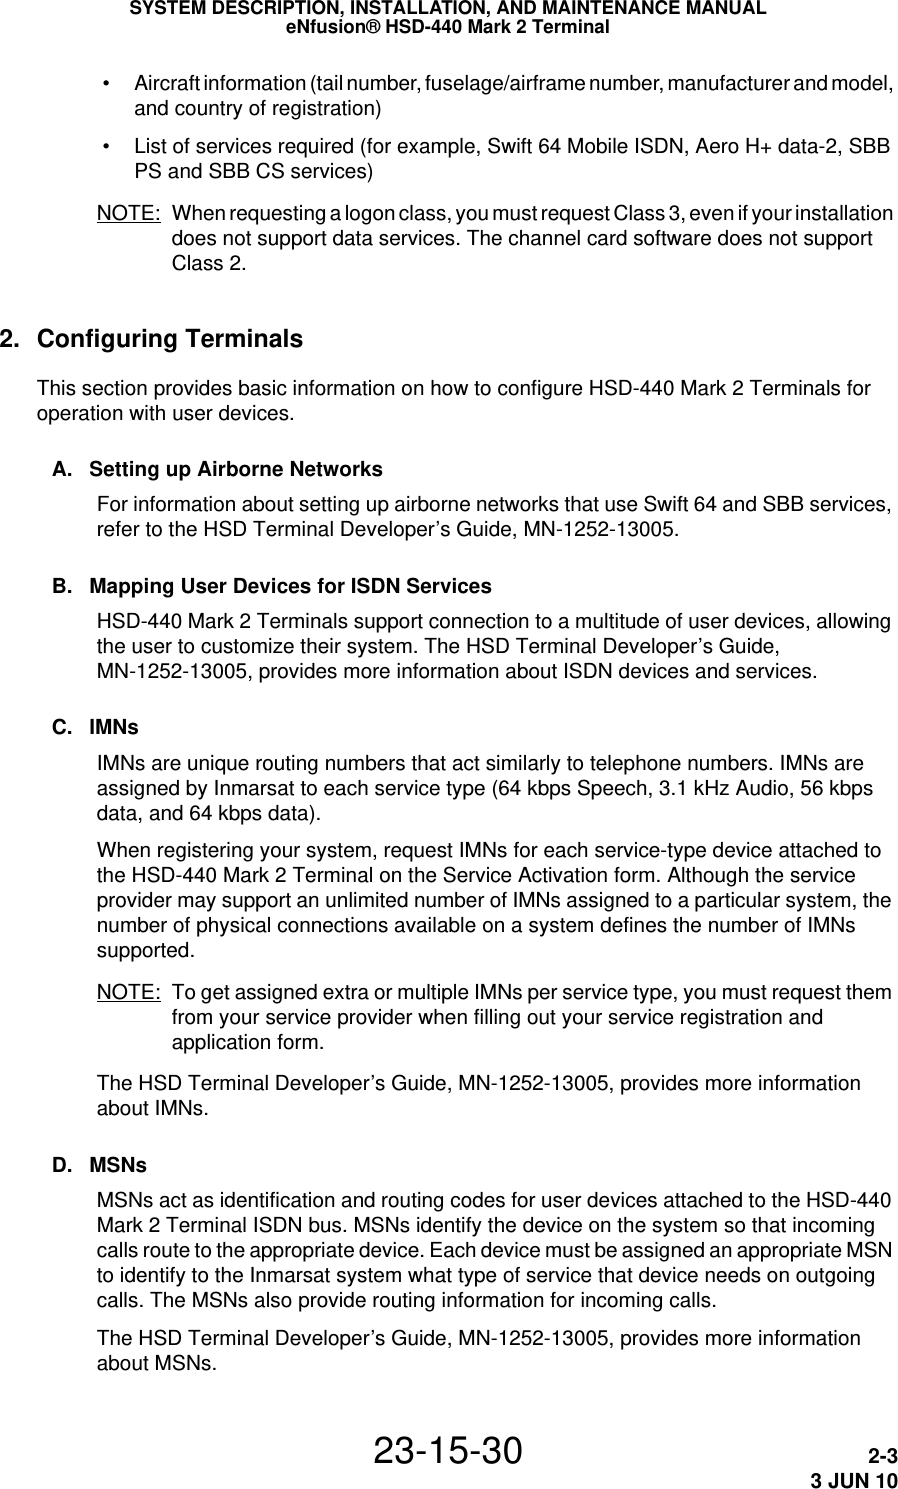 SYSTEM DESCRIPTION, INSTALLATION, AND MAINTENANCE MANUALeNfusion® HSD-440 Mark 2 Terminal23-15-30 2-33 JUN 10 • Aircraft information (tail number, fuselage/airframe number, manufacturer and model, and country of registration) • List of services required (for example, Swift 64 Mobile ISDN, Aero H+ data-2, SBB PS and SBB CS services)NOTE: When requesting a logon class, you must request Class 3, even if your installation does not support data services. The channel card software does not support Class 2.2. Configuring TerminalsThis section provides basic information on how to configure HSD-440 Mark 2 Terminals for operation with user devices.A. Setting up Airborne NetworksFor information about setting up airborne networks that use Swift 64 and SBB services, refer to the HSD Terminal Developer’s Guide, MN-1252-13005.B. Mapping User Devices for ISDN ServicesHSD-440 Mark 2 Terminals support connection to a multitude of user devices, allowing the user to customize their system. The HSD Terminal Developer’s Guide, MN-1252-13005, provides more information about ISDN devices and services.C. IMNsIMNs are unique routing numbers that act similarly to telephone numbers. IMNs are assigned by Inmarsat to each service type (64 kbps Speech, 3.1 kHz Audio, 56 kbps data, and 64 kbps data).When registering your system, request IMNs for each service-type device attached to the HSD-440 Mark 2 Terminal on the Service Activation form. Although the service provider may support an unlimited number of IMNs assigned to a particular system, the number of physical connections available on a system defines the number of IMNs supported.NOTE: To get assigned extra or multiple IMNs per service type, you must request them from your service provider when filling out your service registration and application form.The HSD Terminal Developer’s Guide, MN-1252-13005, provides more information about IMNs.D. MSNsMSNs act as identification and routing codes for user devices attached to the HSD-440 Mark 2 Terminal ISDN bus. MSNs identify the device on the system so that incoming calls route to the appropriate device. Each device must be assigned an appropriate MSN to identify to the Inmarsat system what type of service that device needs on outgoing calls. The MSNs also provide routing information for incoming calls.The HSD Terminal Developer’s Guide, MN-1252-13005, provides more information about MSNs.